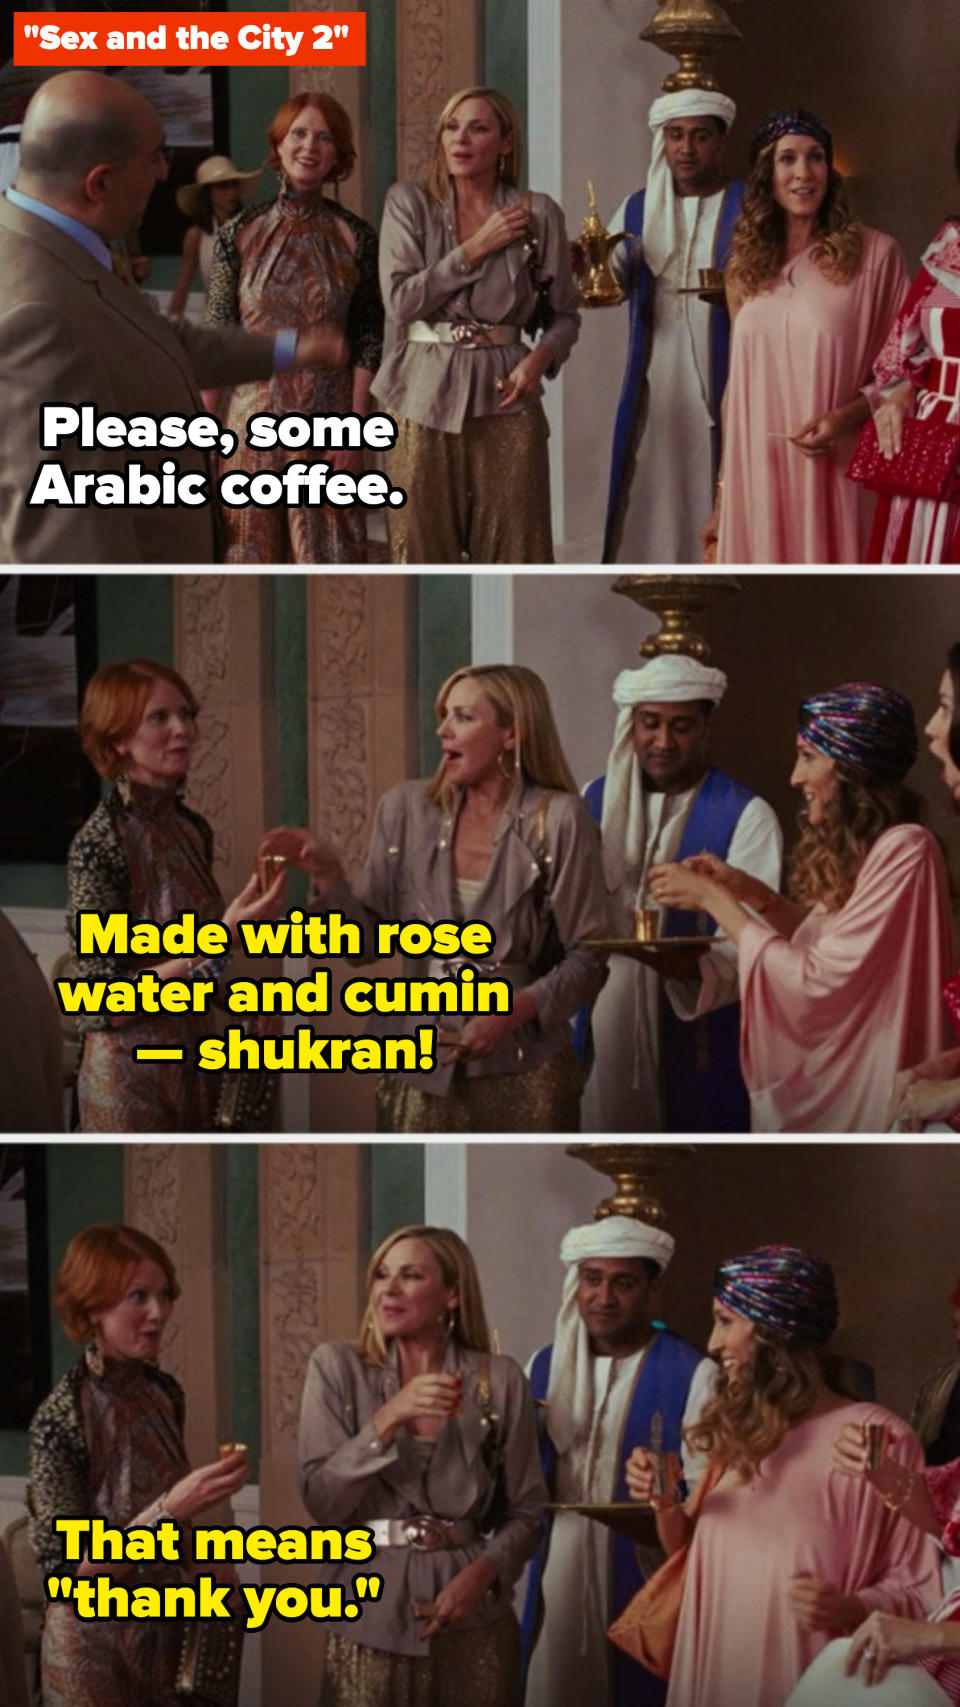 Miranda explaining to Carrie, Charlotte, and Samantha that Arabic coffee is made of rose water and cumin in "Sex and the City 2"